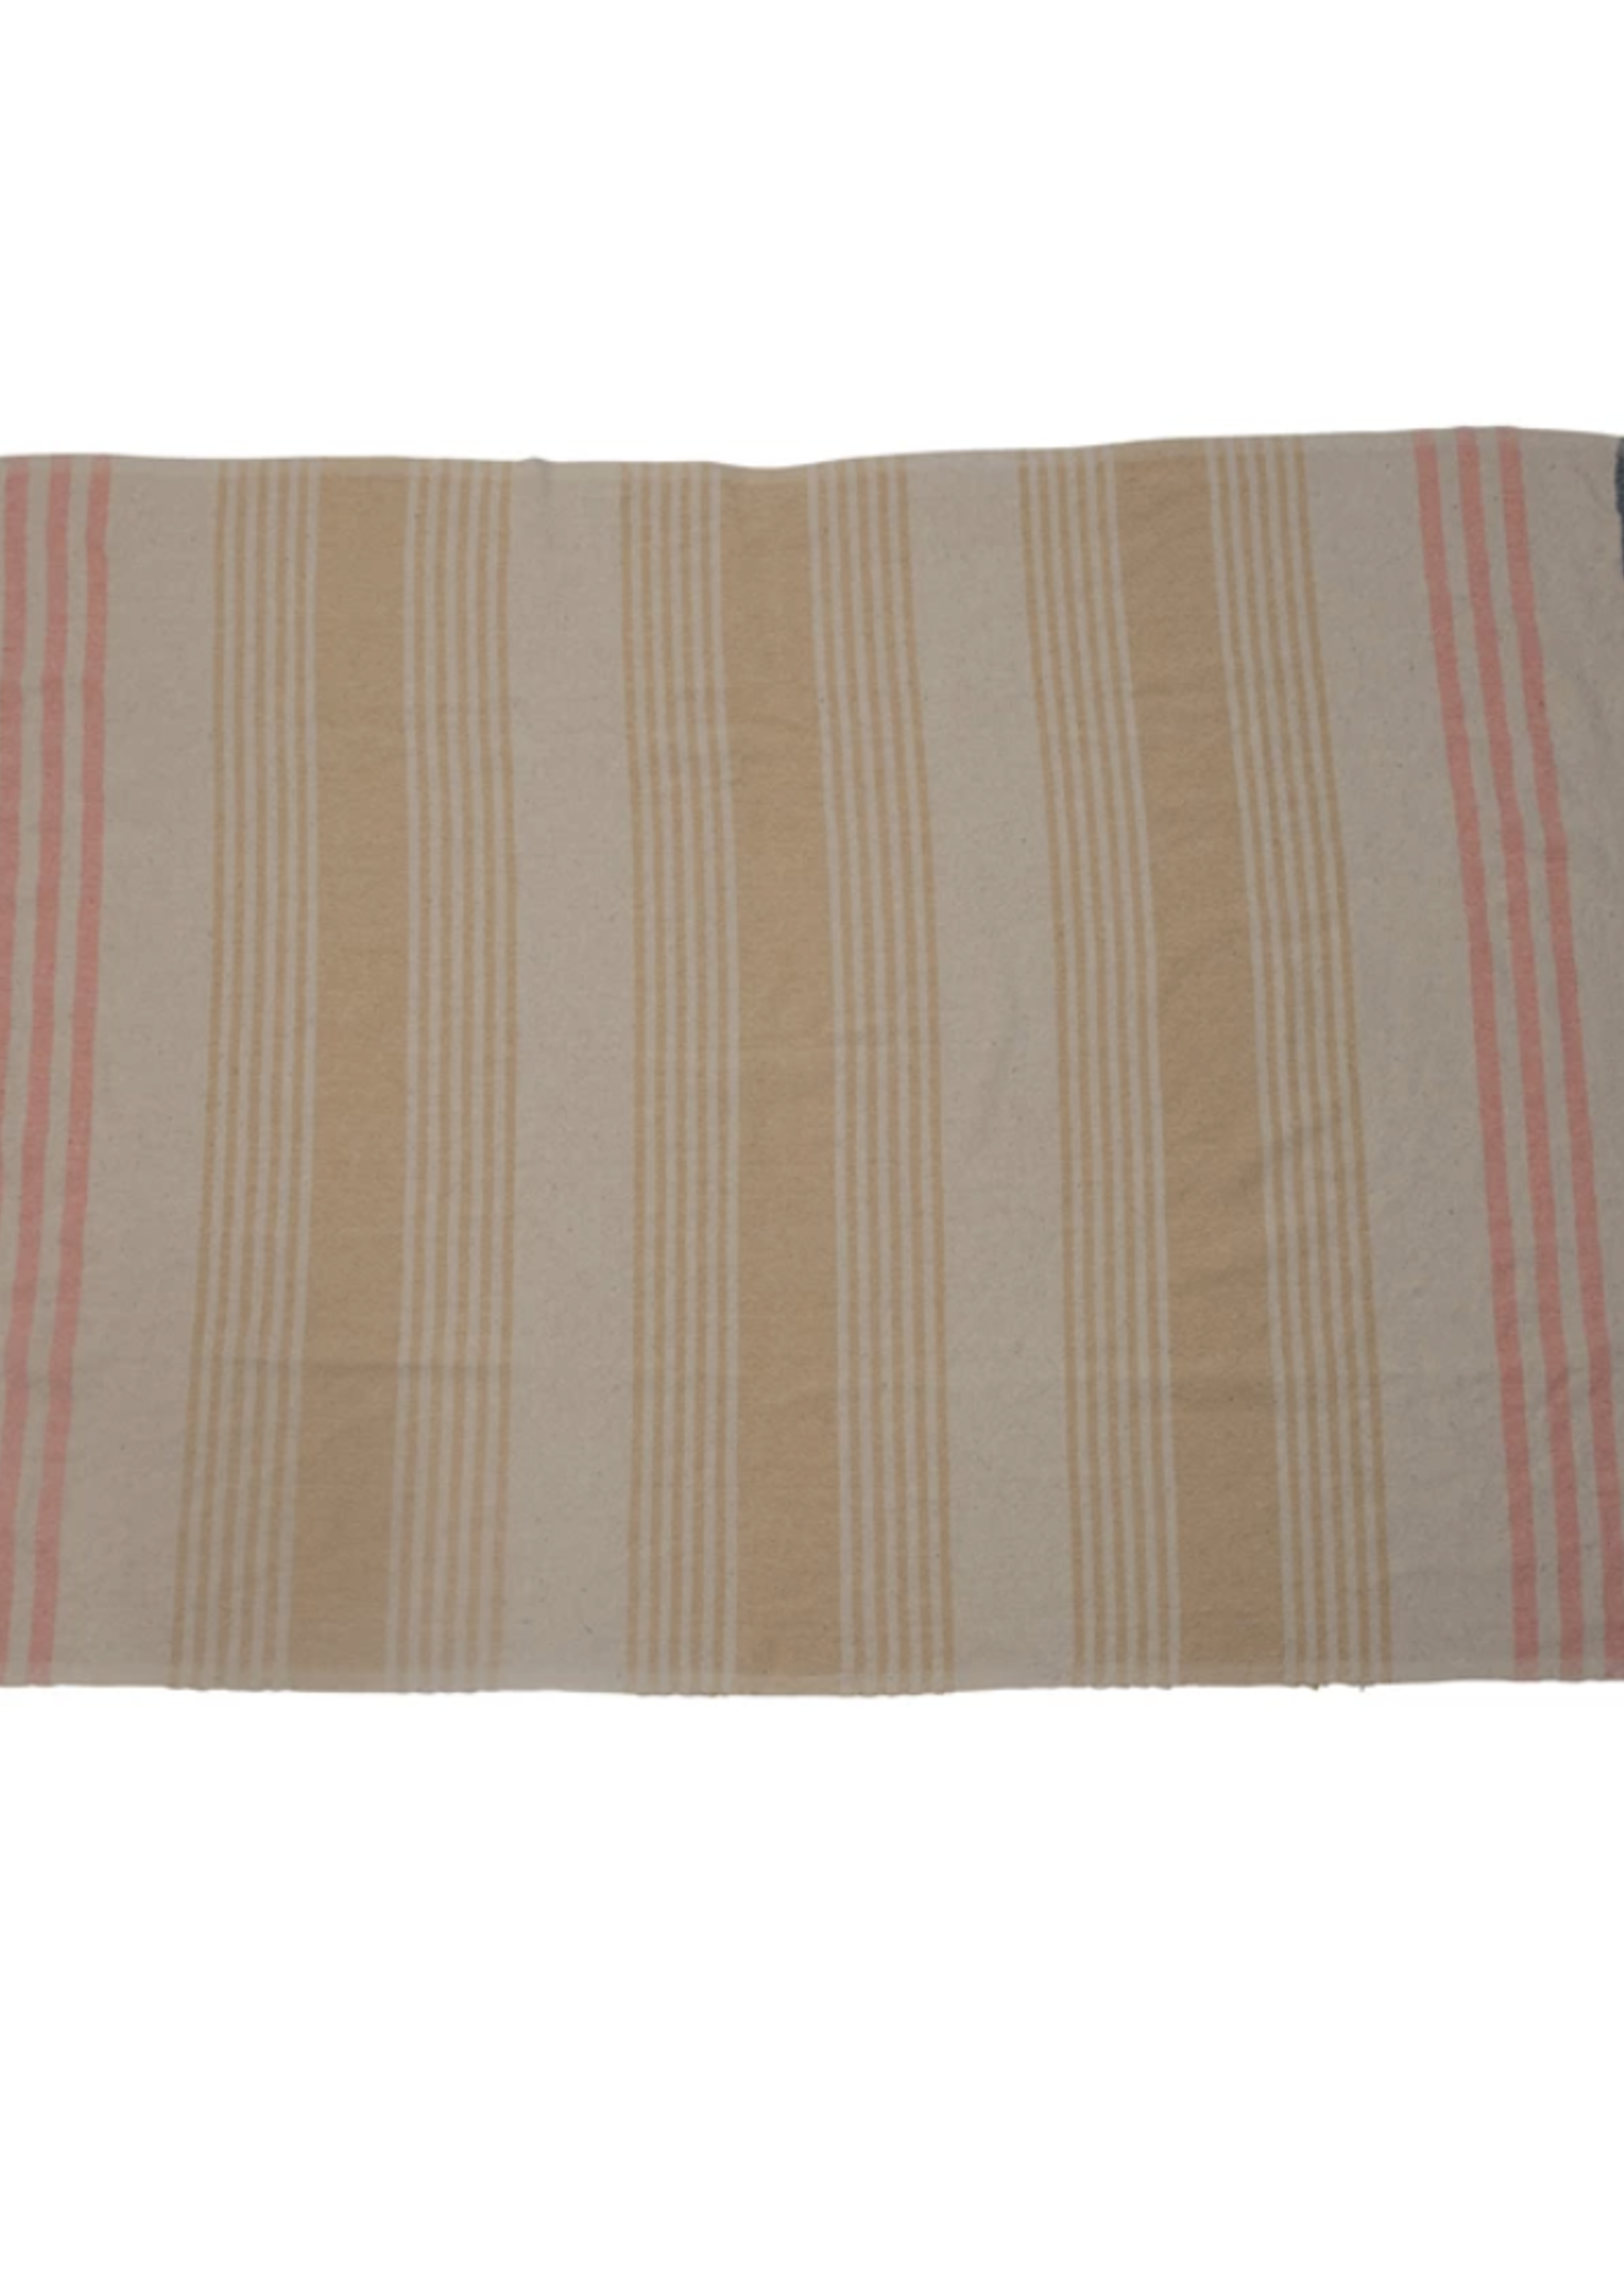 Creative Co-Op Woven Recycled Cotton Blend Throw w/ Stripes & Fringe, Multi Color